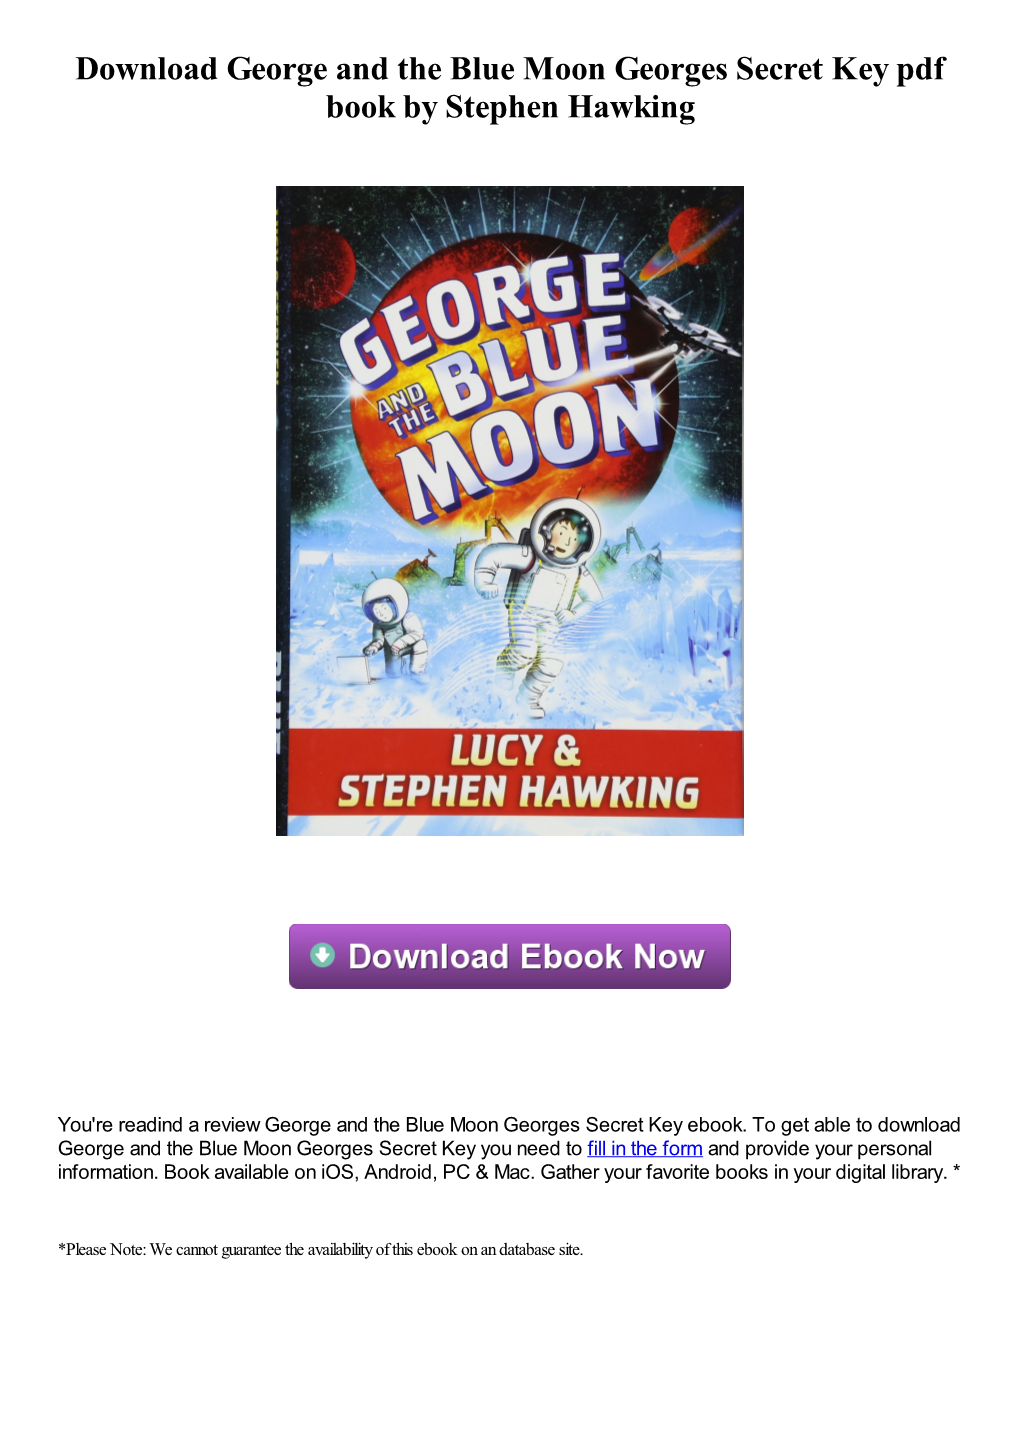 Download George and the Blue Moon Georges Secret Key Pdf Ebook by Stephen Hawking